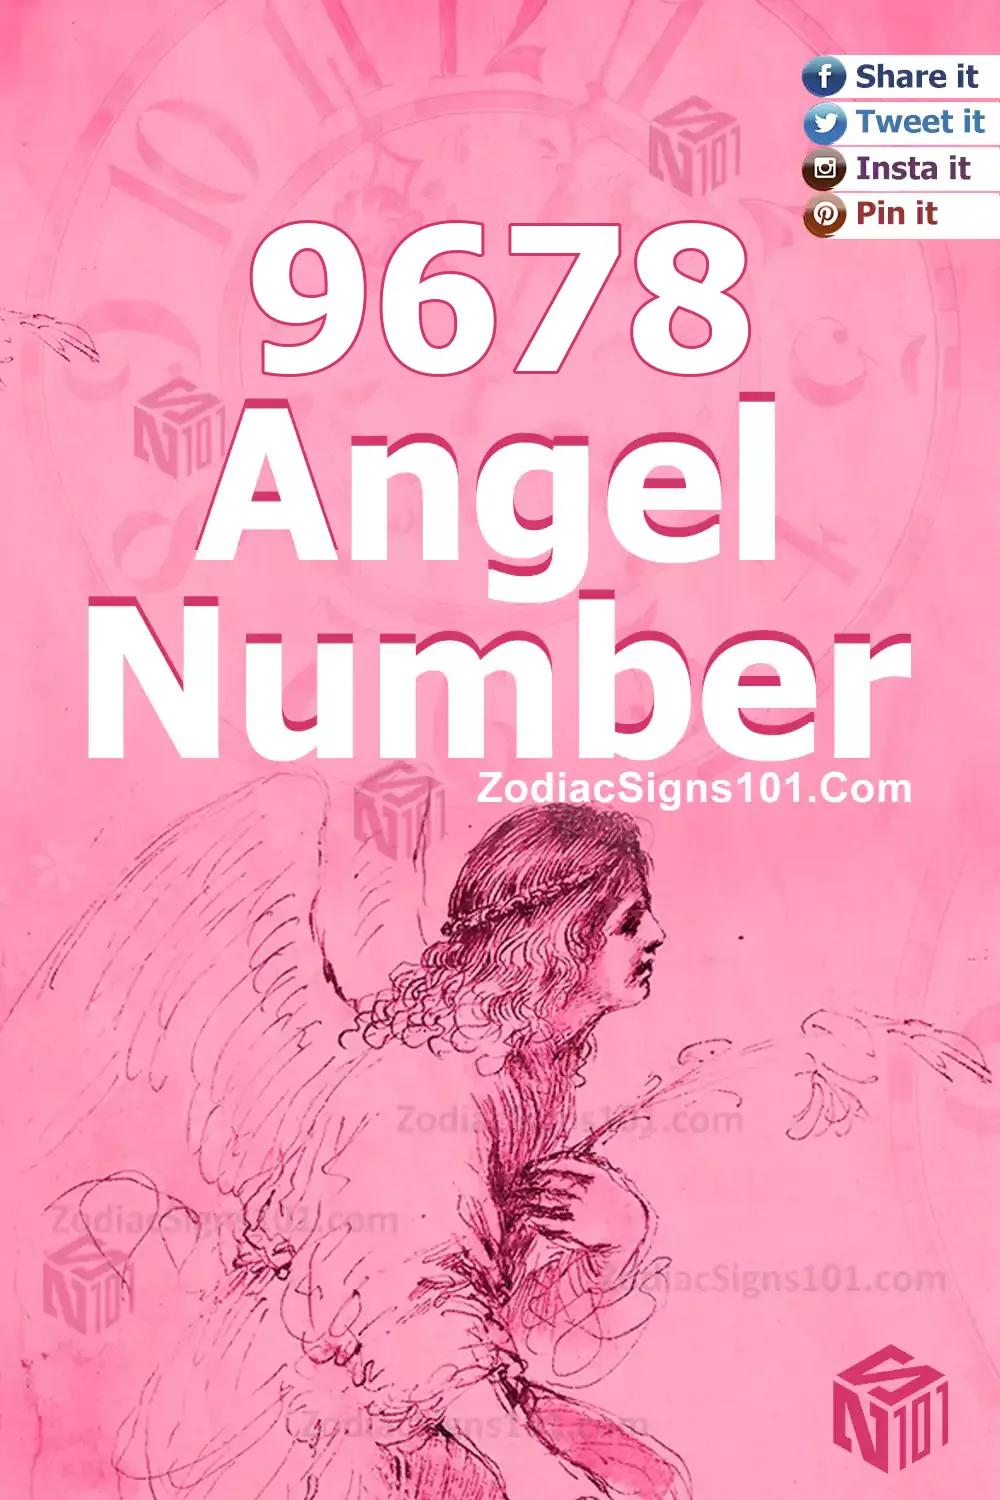 9678 Angel Number Meaning